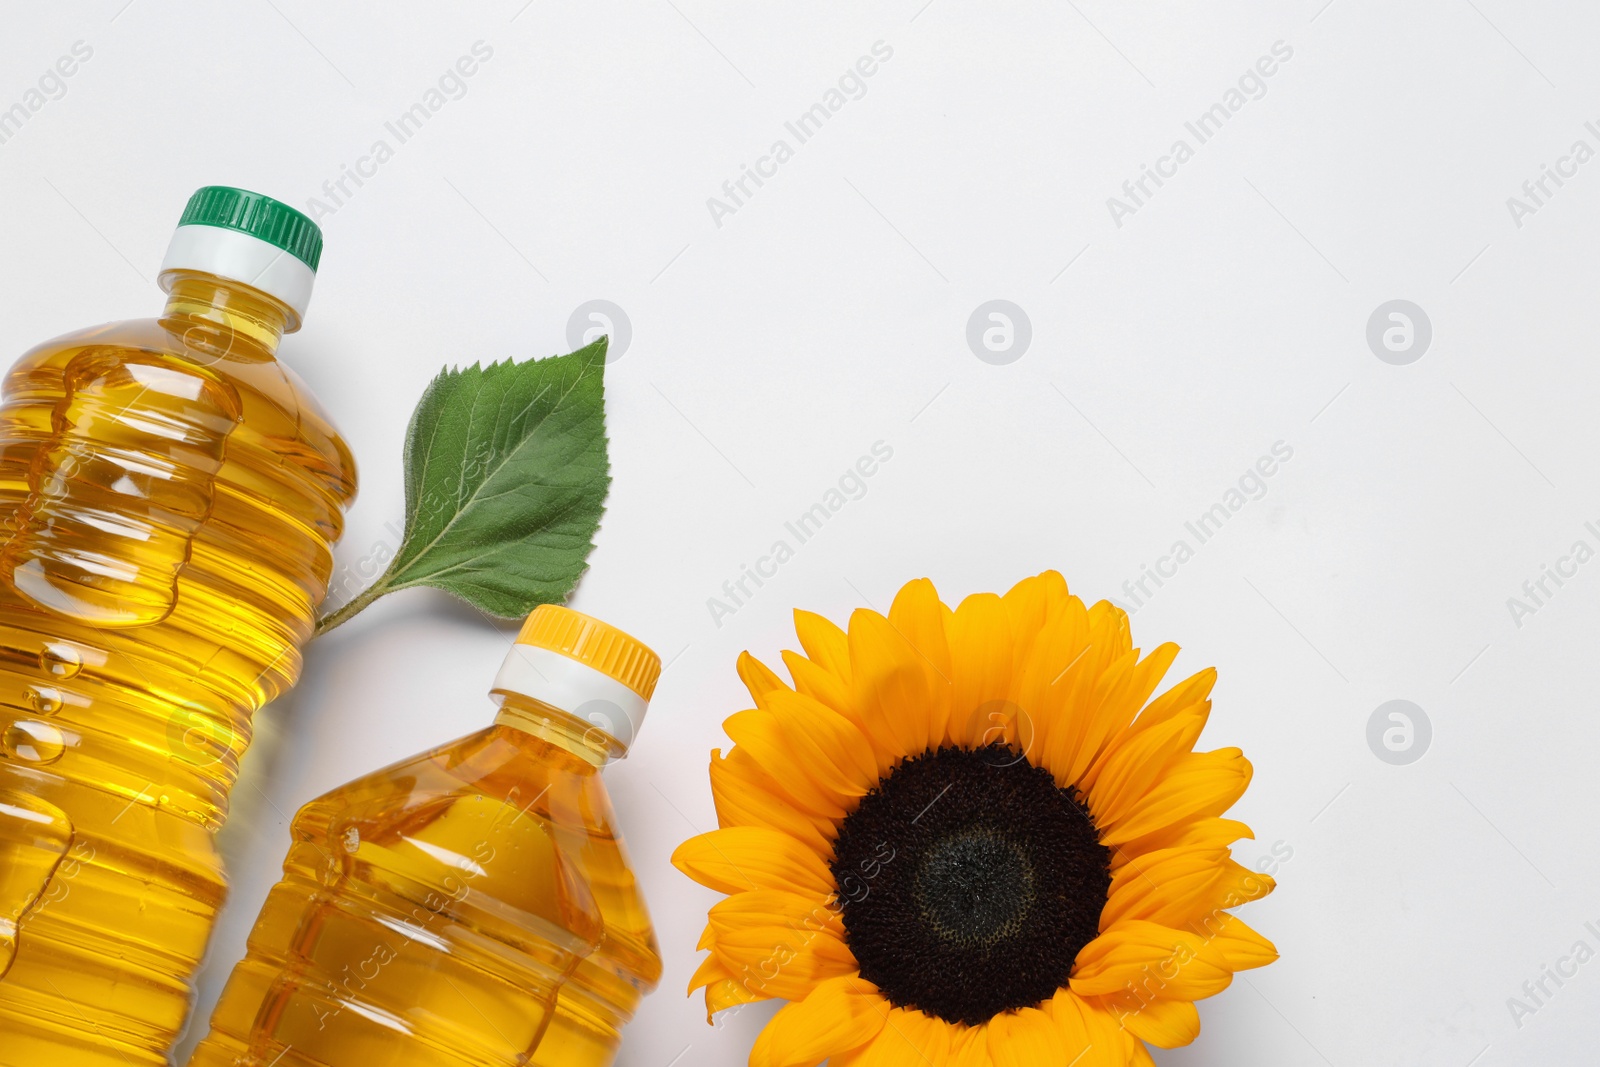 Photo of Bottles of cooking oil and sunflowers on white table, flat lay